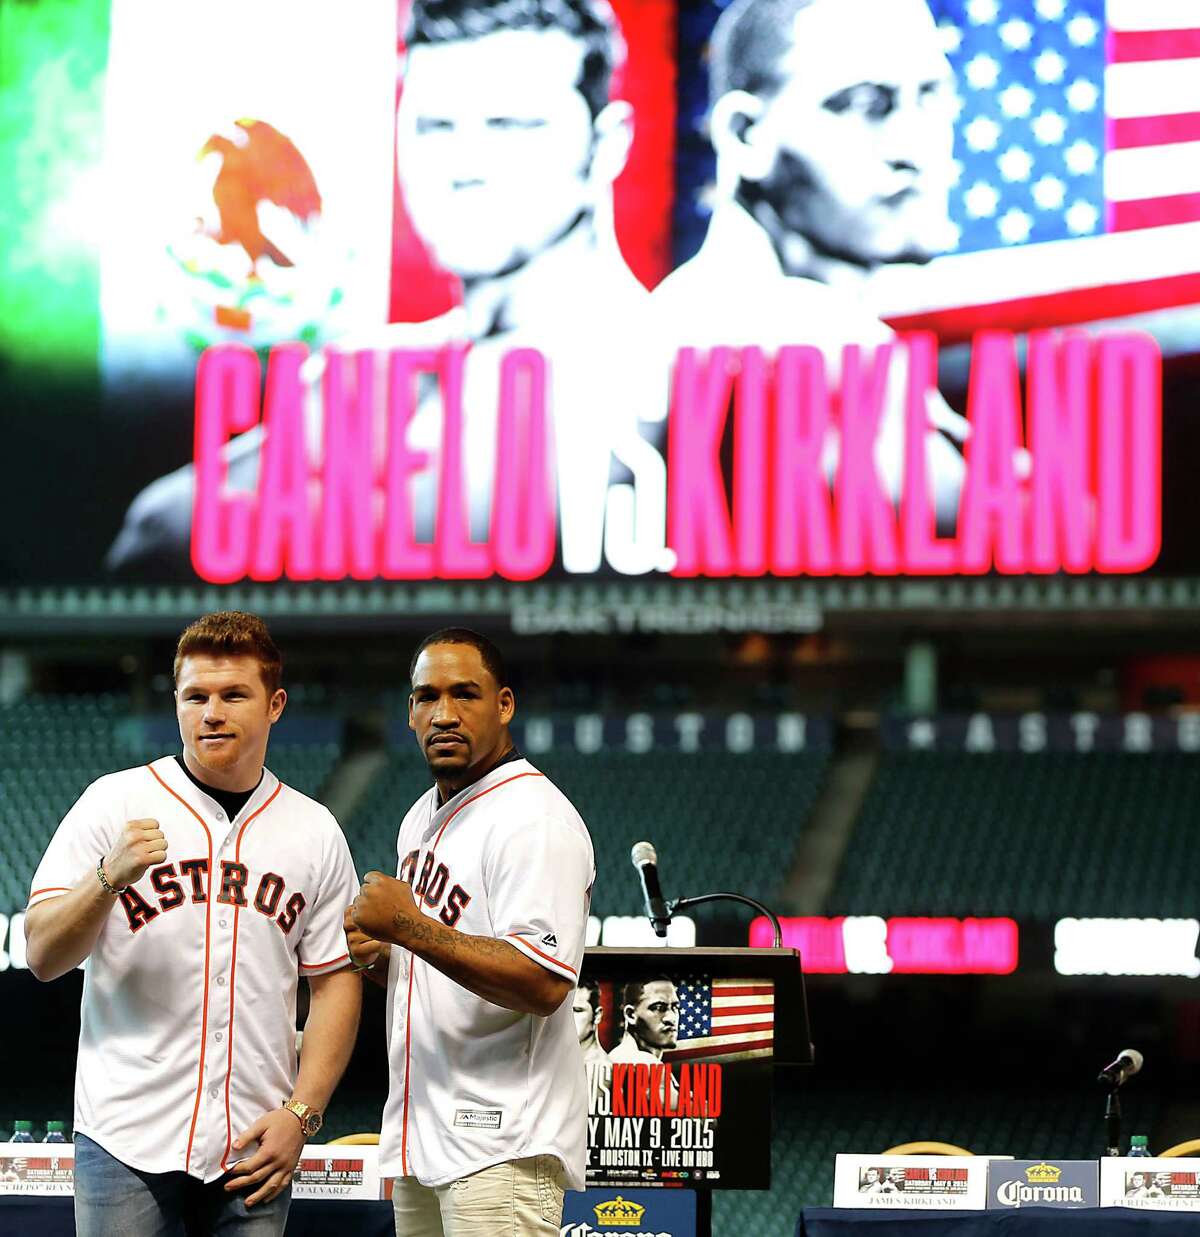 Boxers Canelo Alvarez left, and James Kirkland pose for photograph during a press conference announcing the May 9th boxing match between Alvarez and Kirkland at Minute Maid Field Tuesday, March 3, 2015, in Houston. ( James Nielsen / Houston Chronicle )